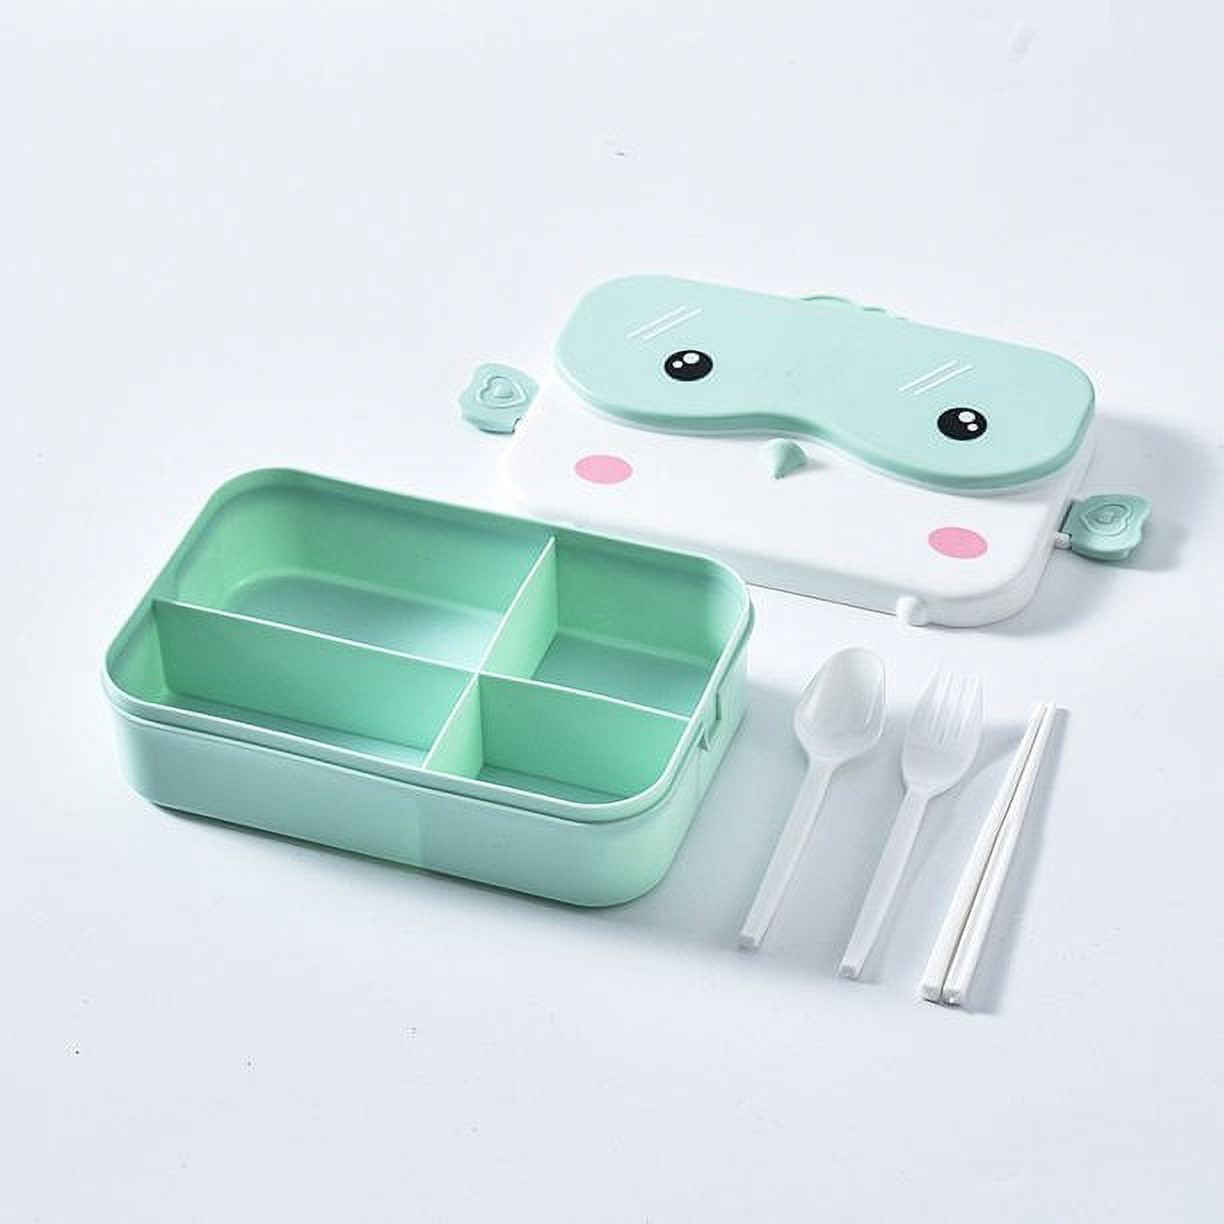 TWOKIWI Bento Lunch Box for Kids - Lunch Containers - Kids Lunch Box with 4  Compartments Includes Sa…See more TWOKIWI Bento Lunch Box for Kids - Lunch